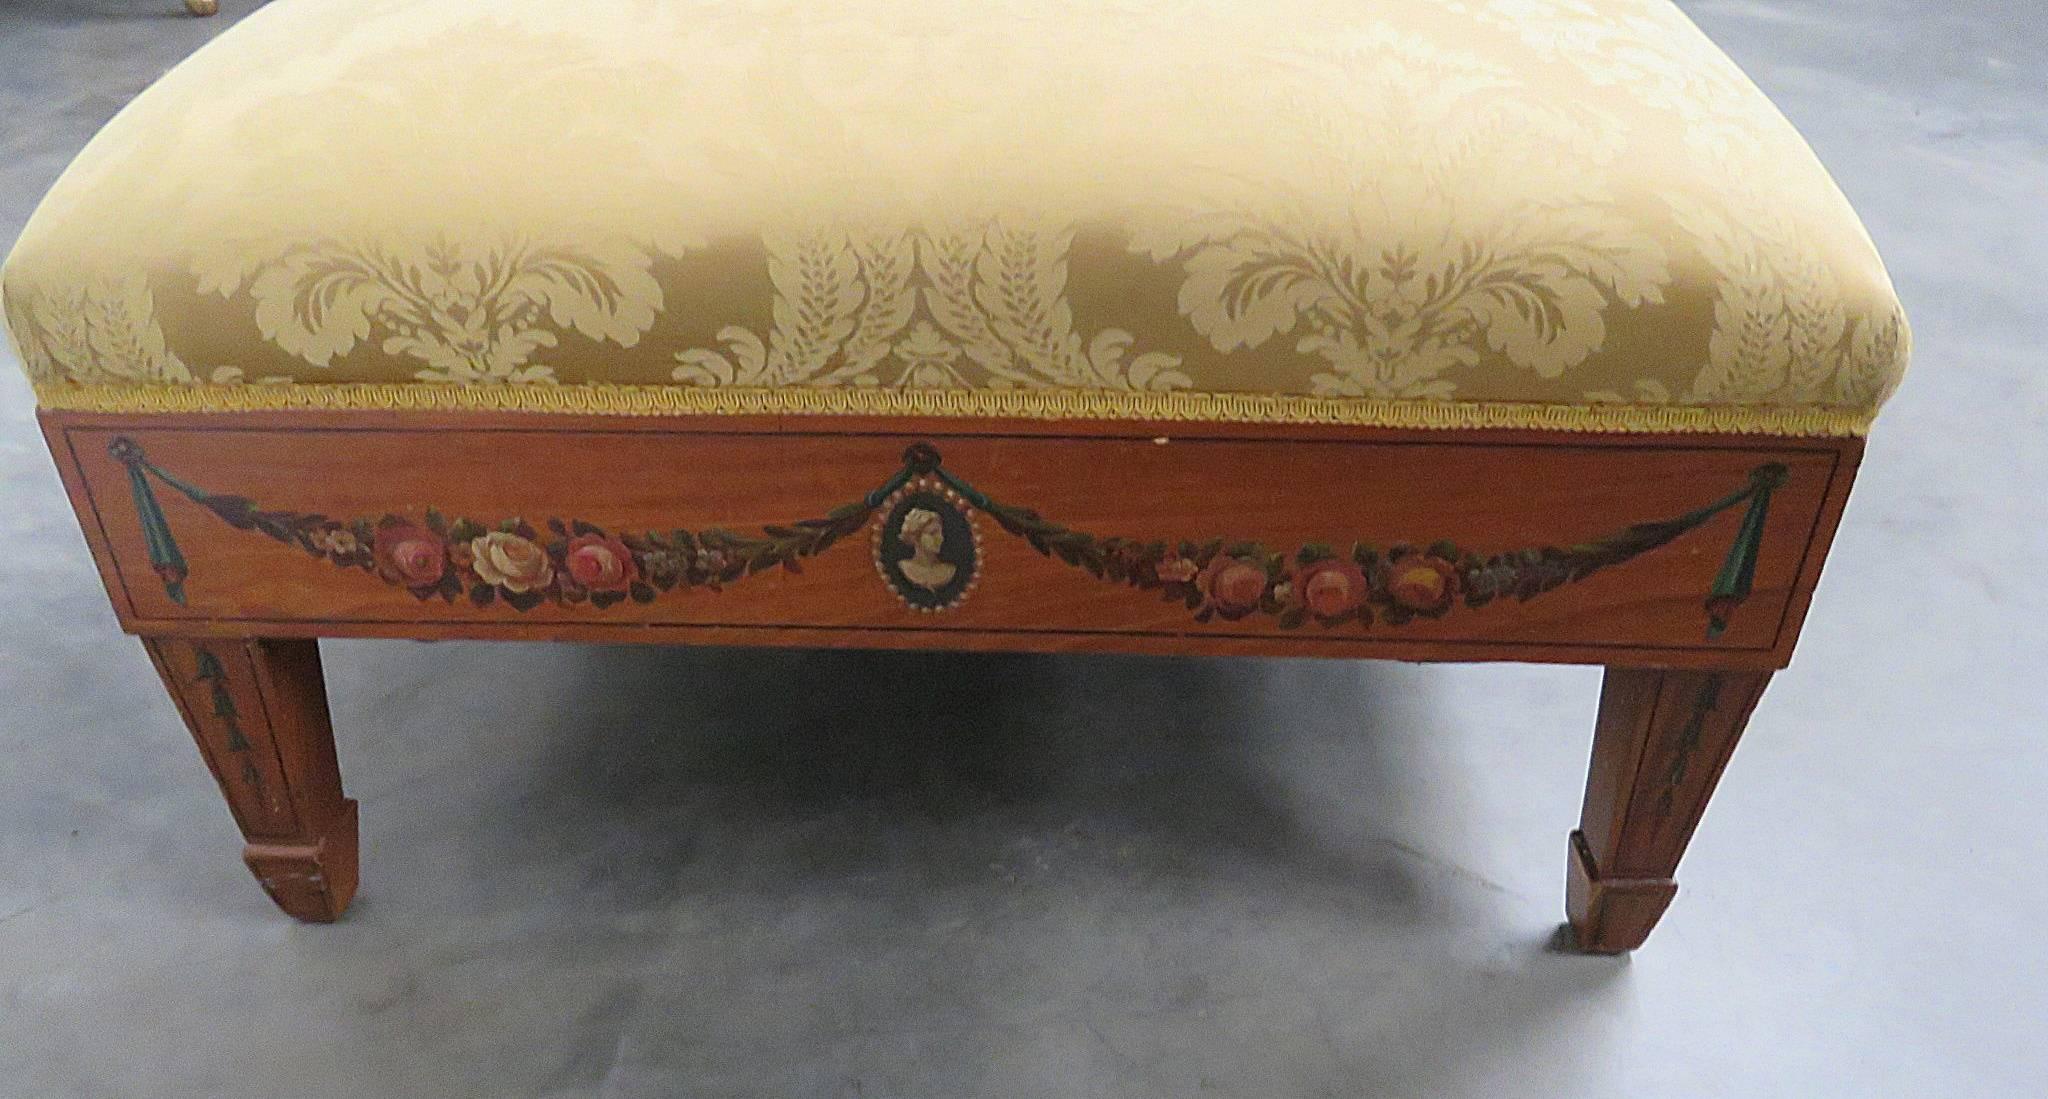 Early English 1850s Era Satinwood Adams Painted Chaise Longue Recamier Daybed 1